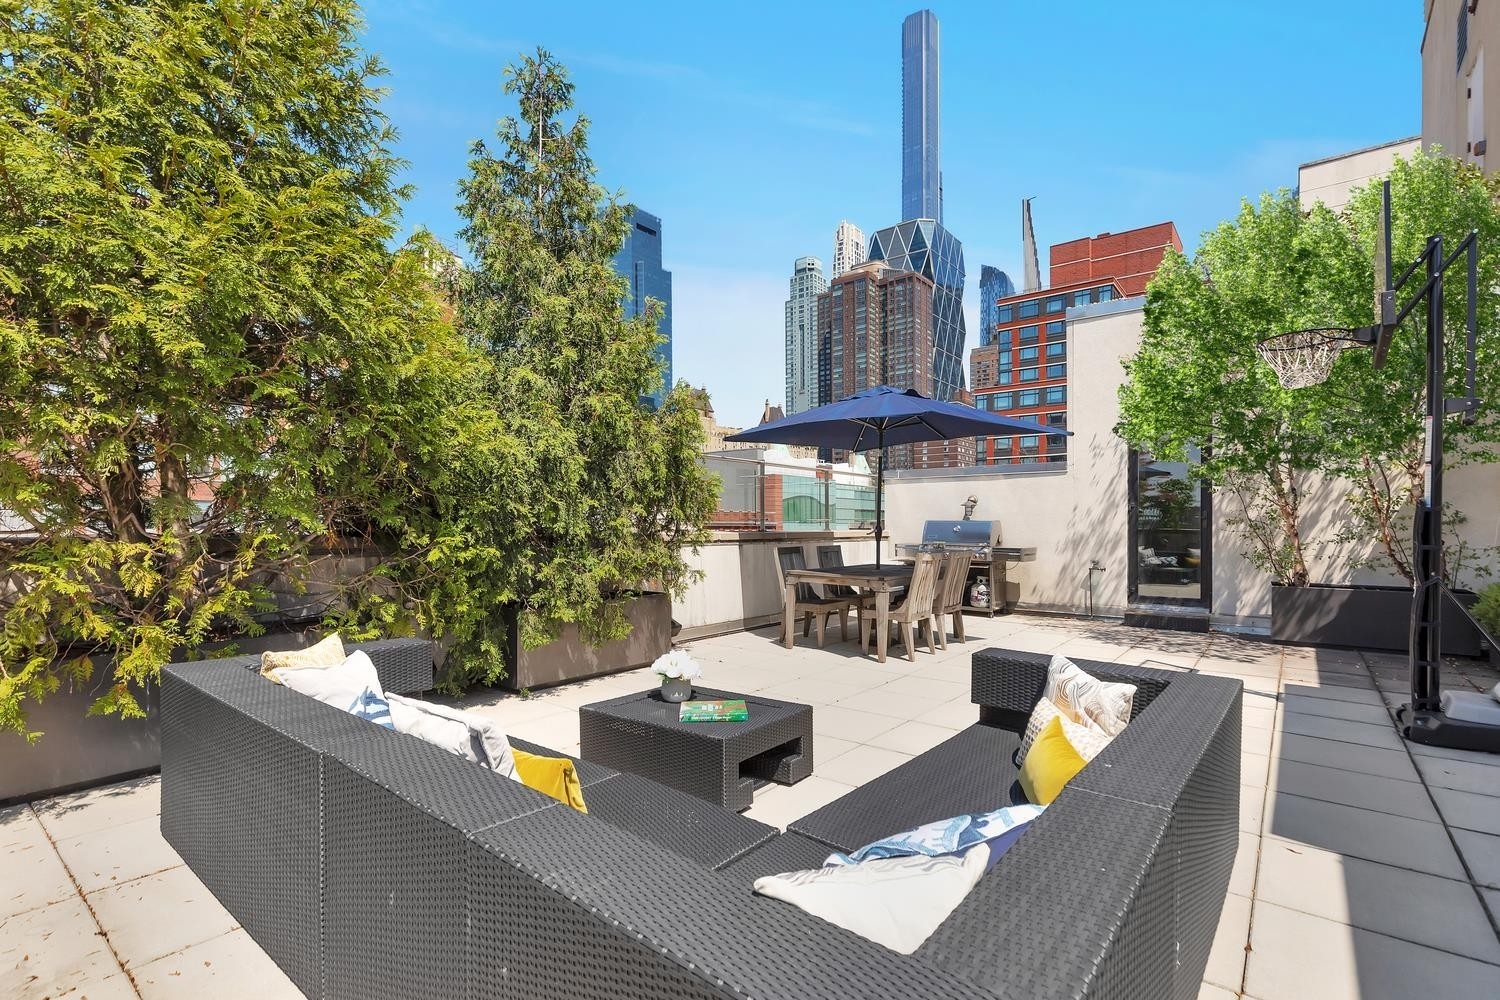 Condominium for Sale at The Hit Factory, 421 W 54TH ST, PHD Hell's Kitchen, New York, New York 10019